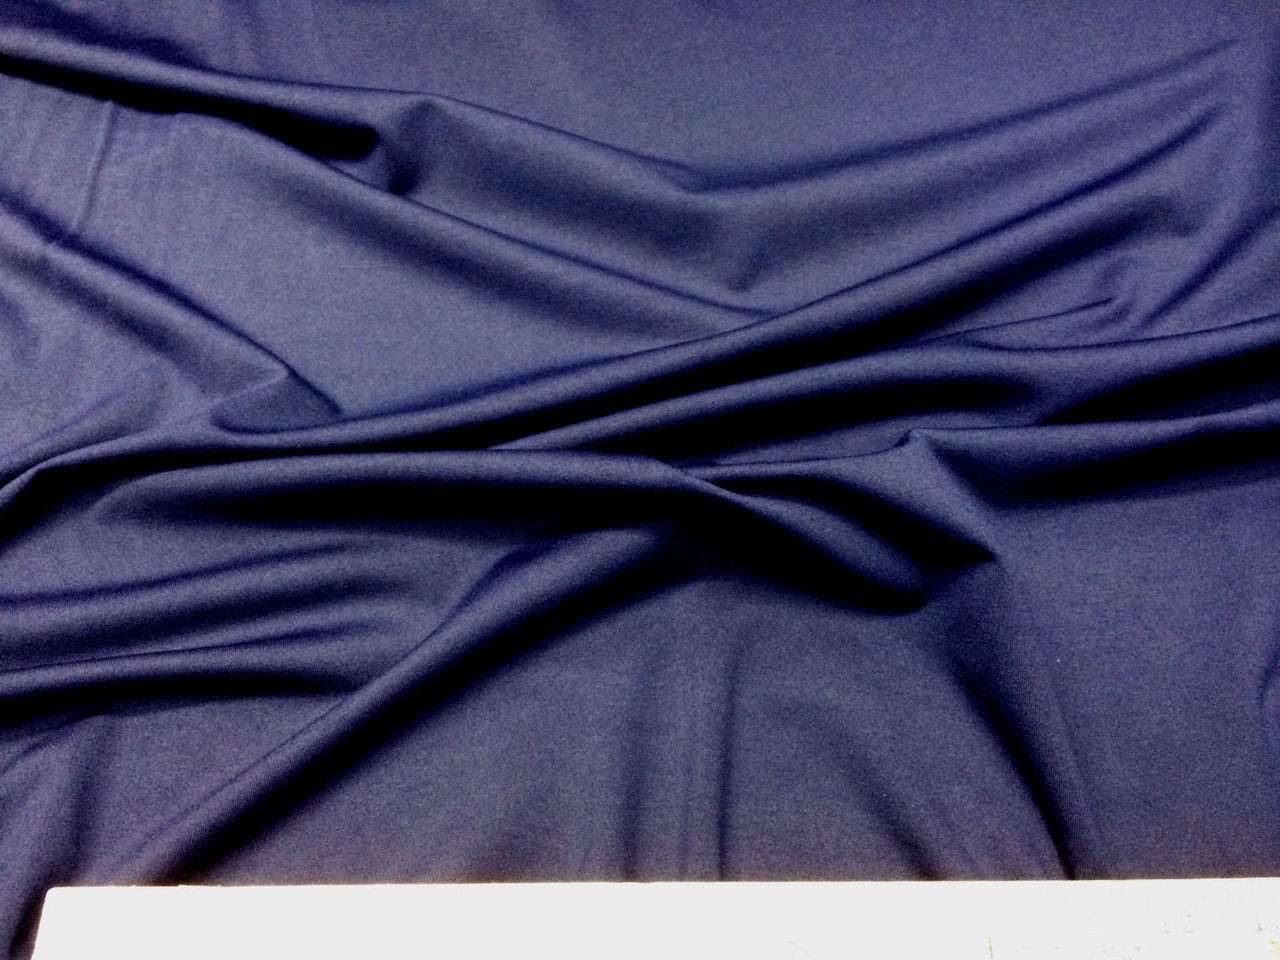 Discount Fabric Polyester Lycra Spandex 4 way stretch Navy 951LY